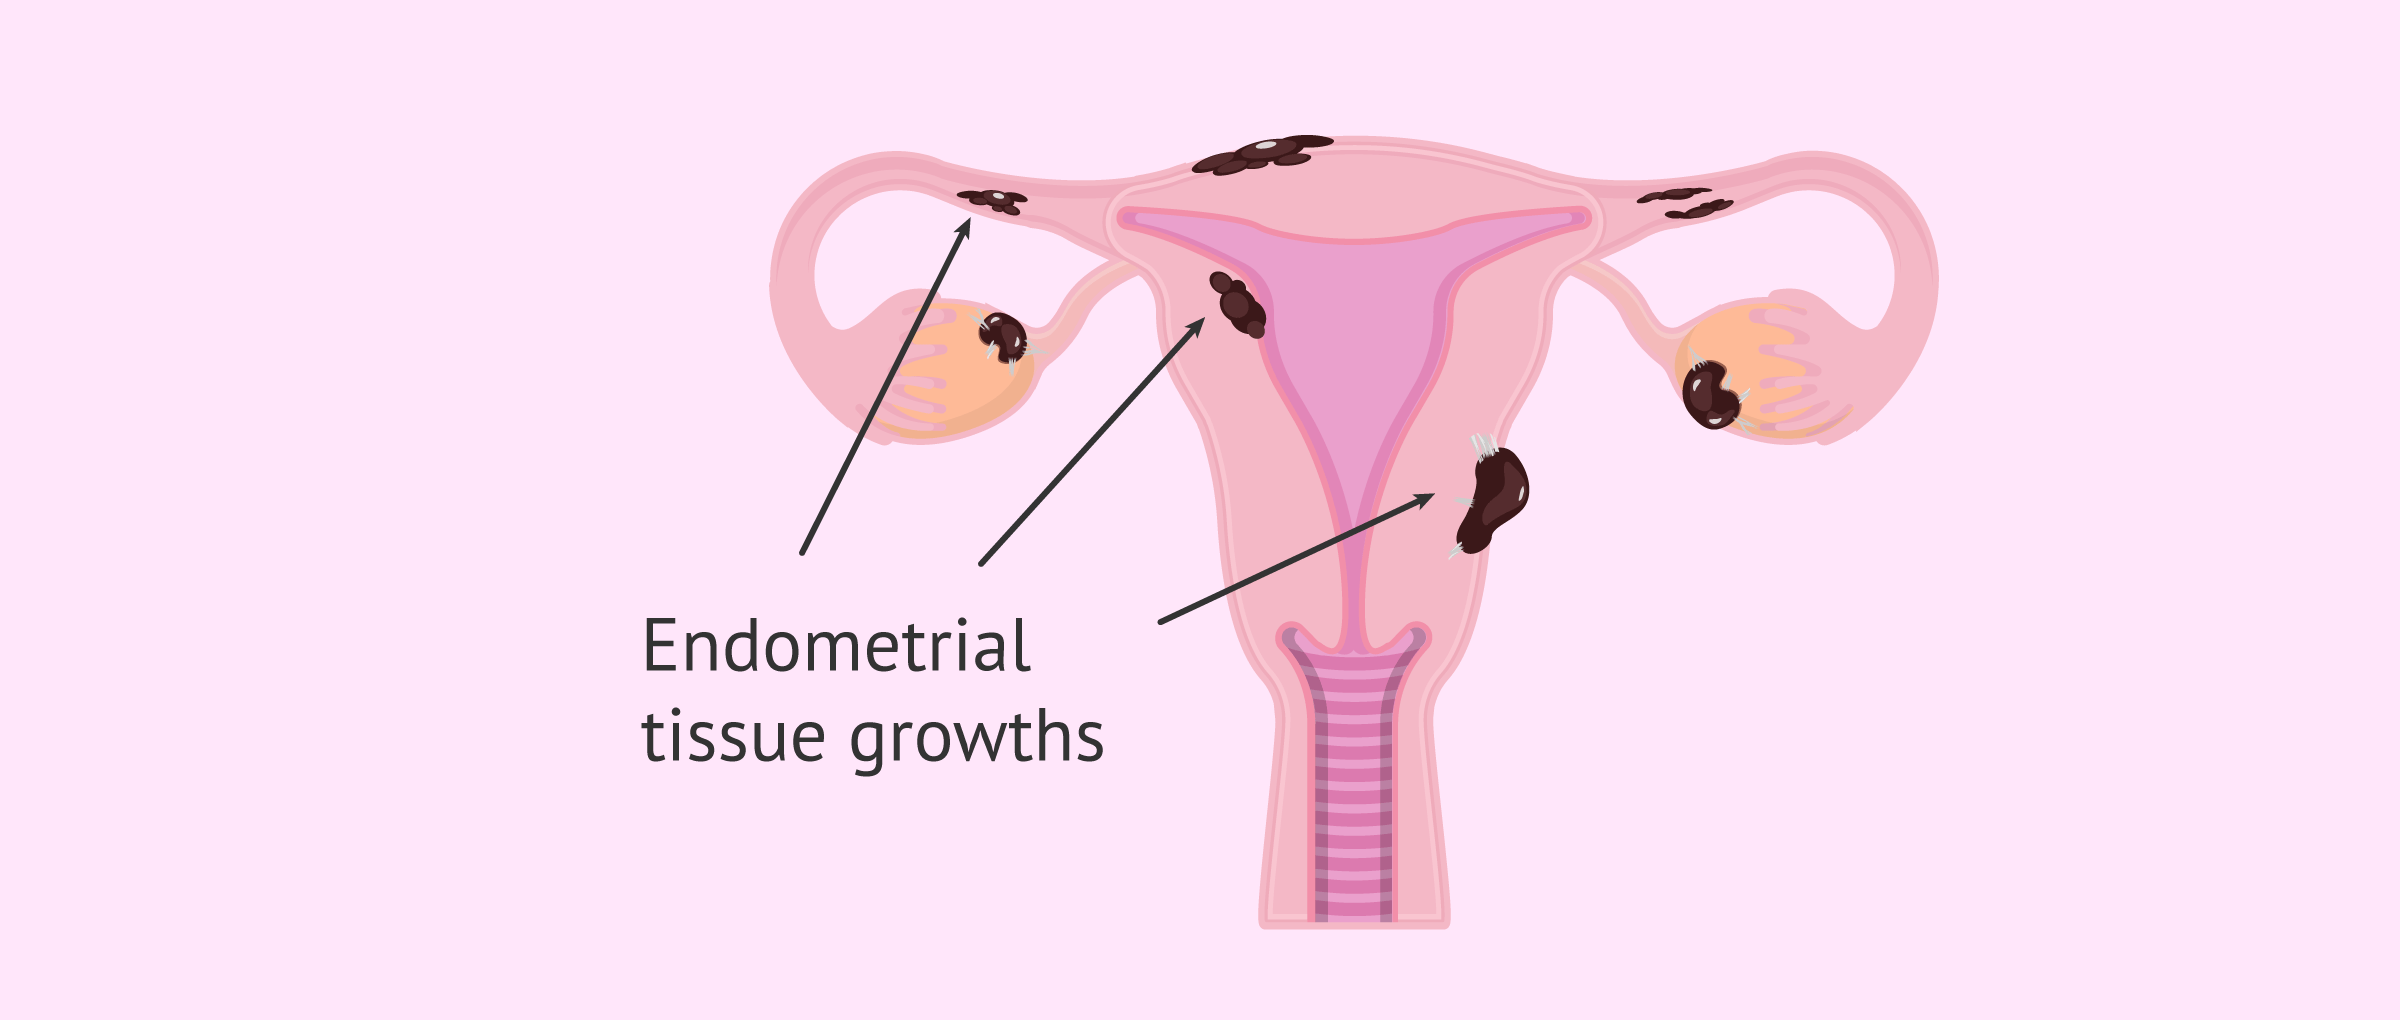 Areas of the female reproductive system with endometriosis